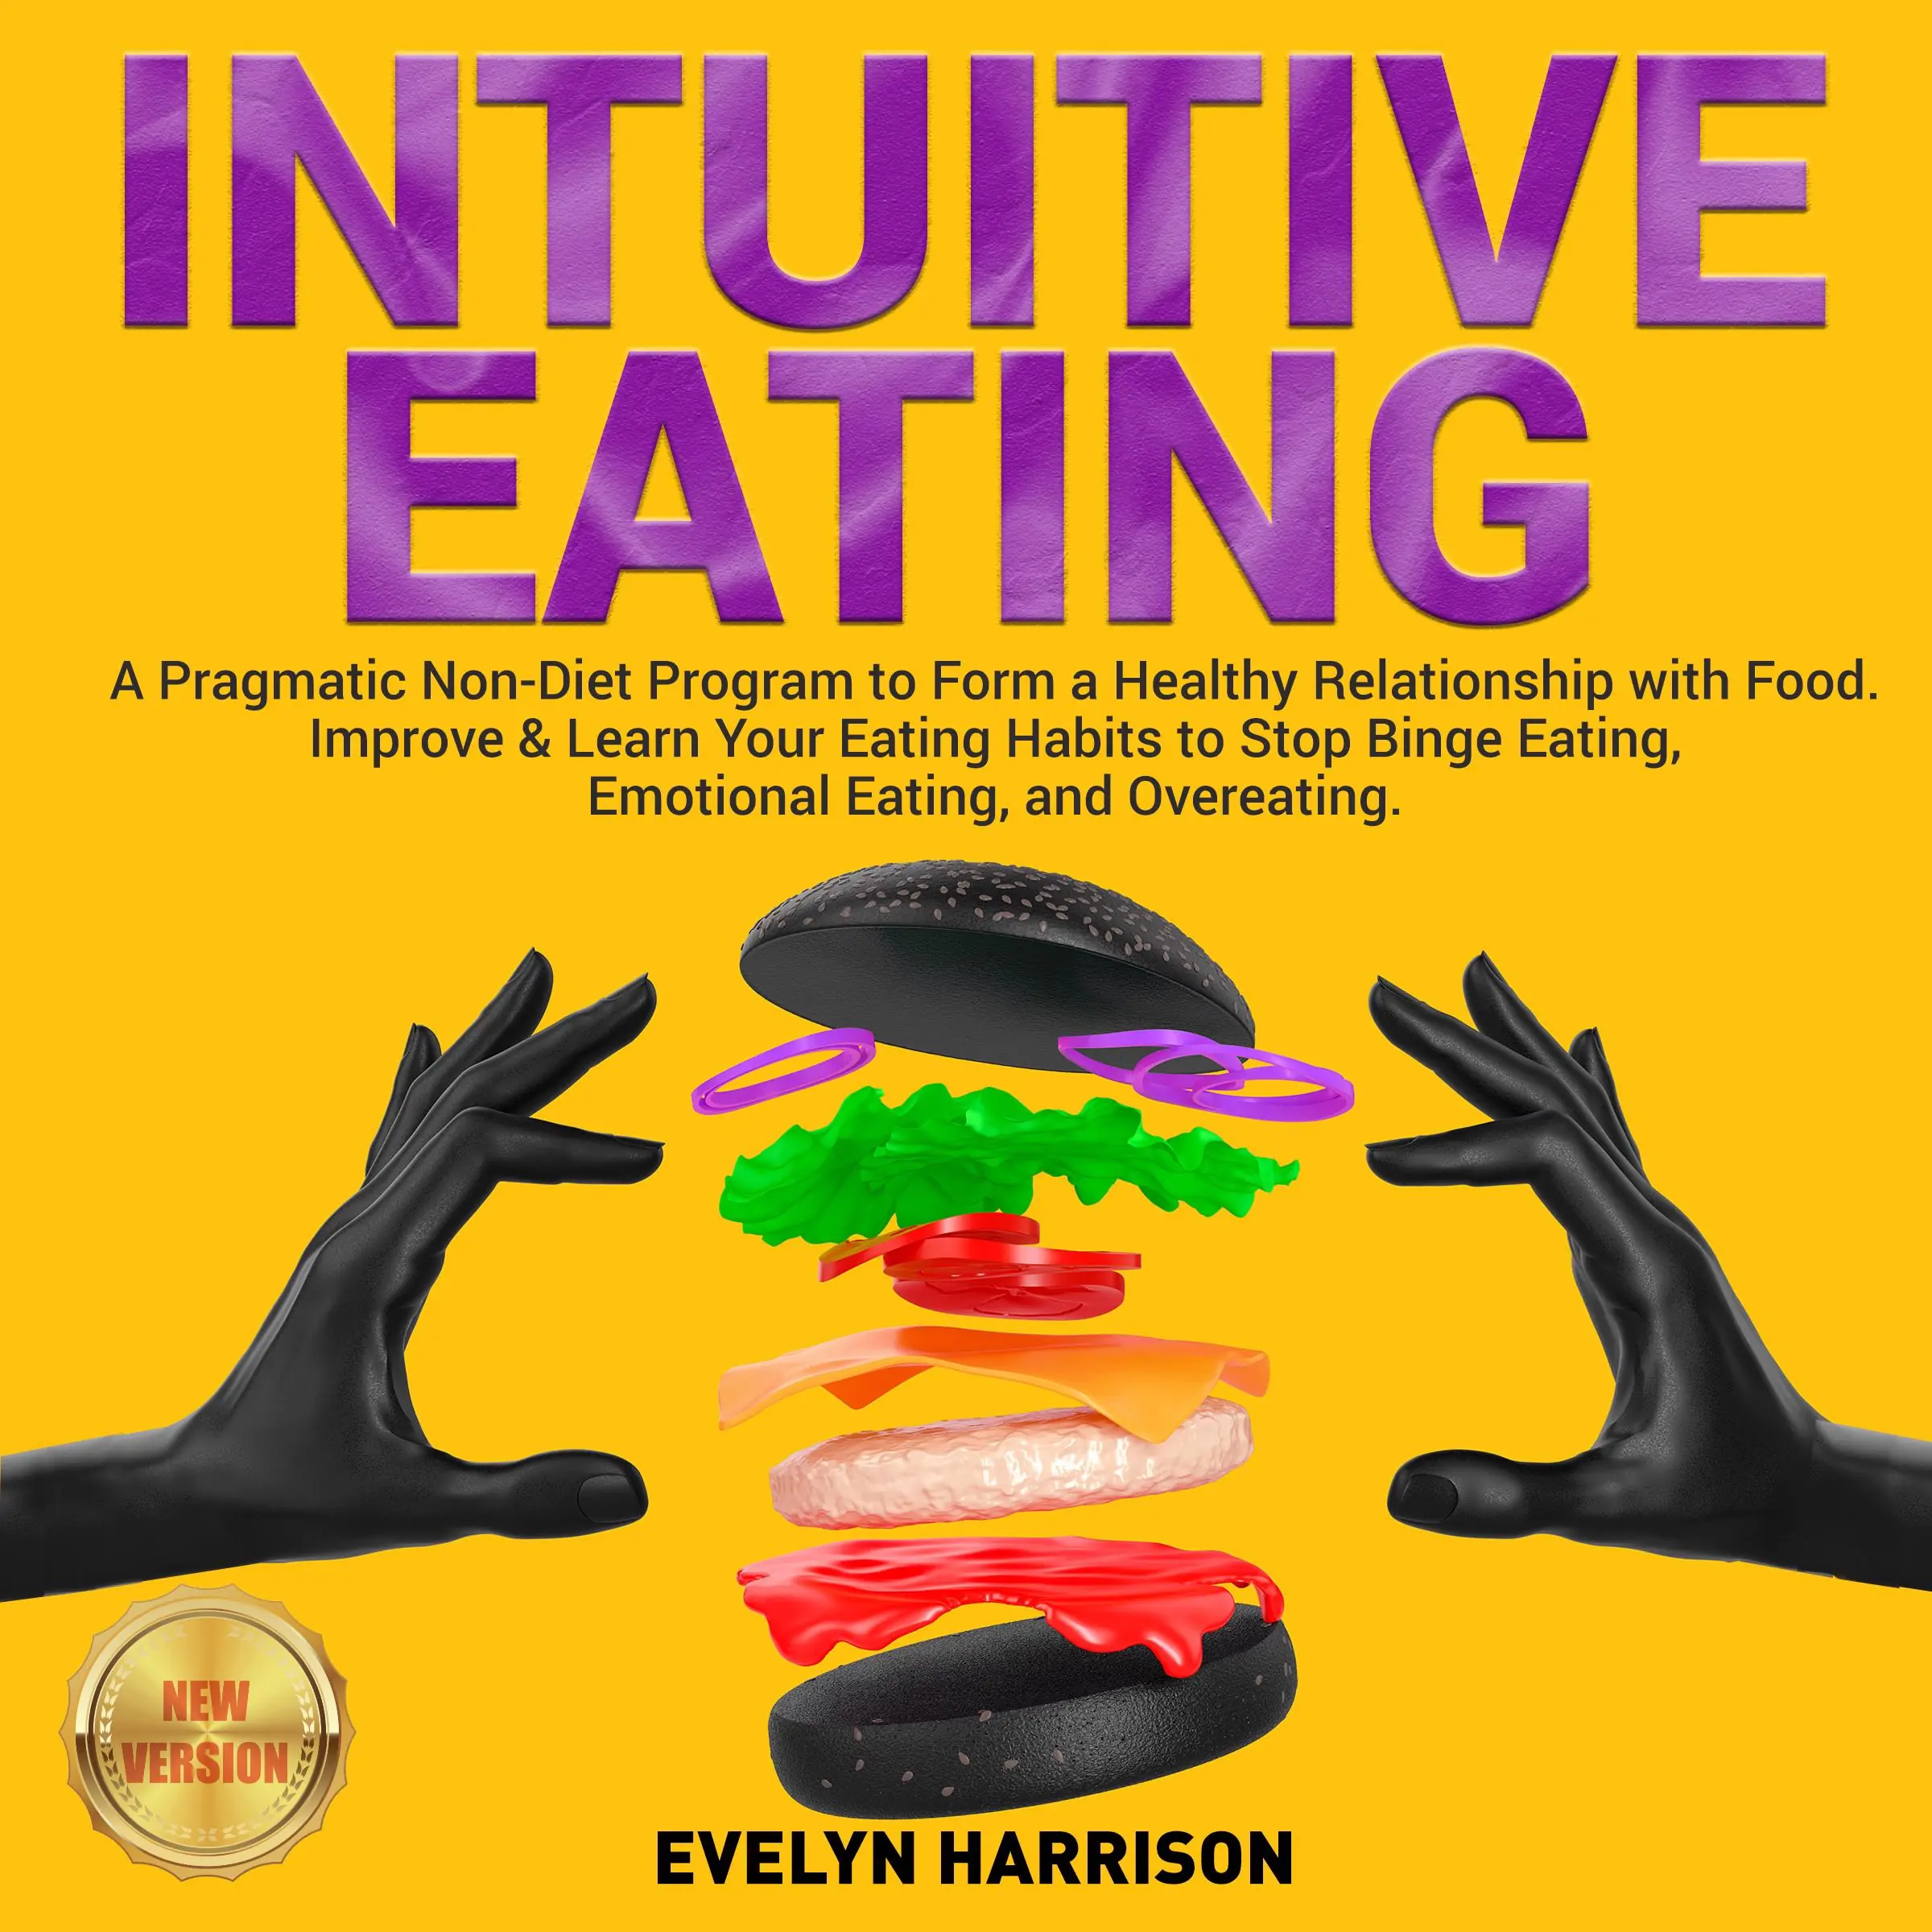 INTUITIVE EATING: A Pragmatic Non-Diet Program to Form a Healthy Relationship with Food. Improve & Learn Your Eating Habits to Stop Binge Eating, Emotional Eating, and Overeating. NEW VERSION Audiobook by EVELYN HARRISON